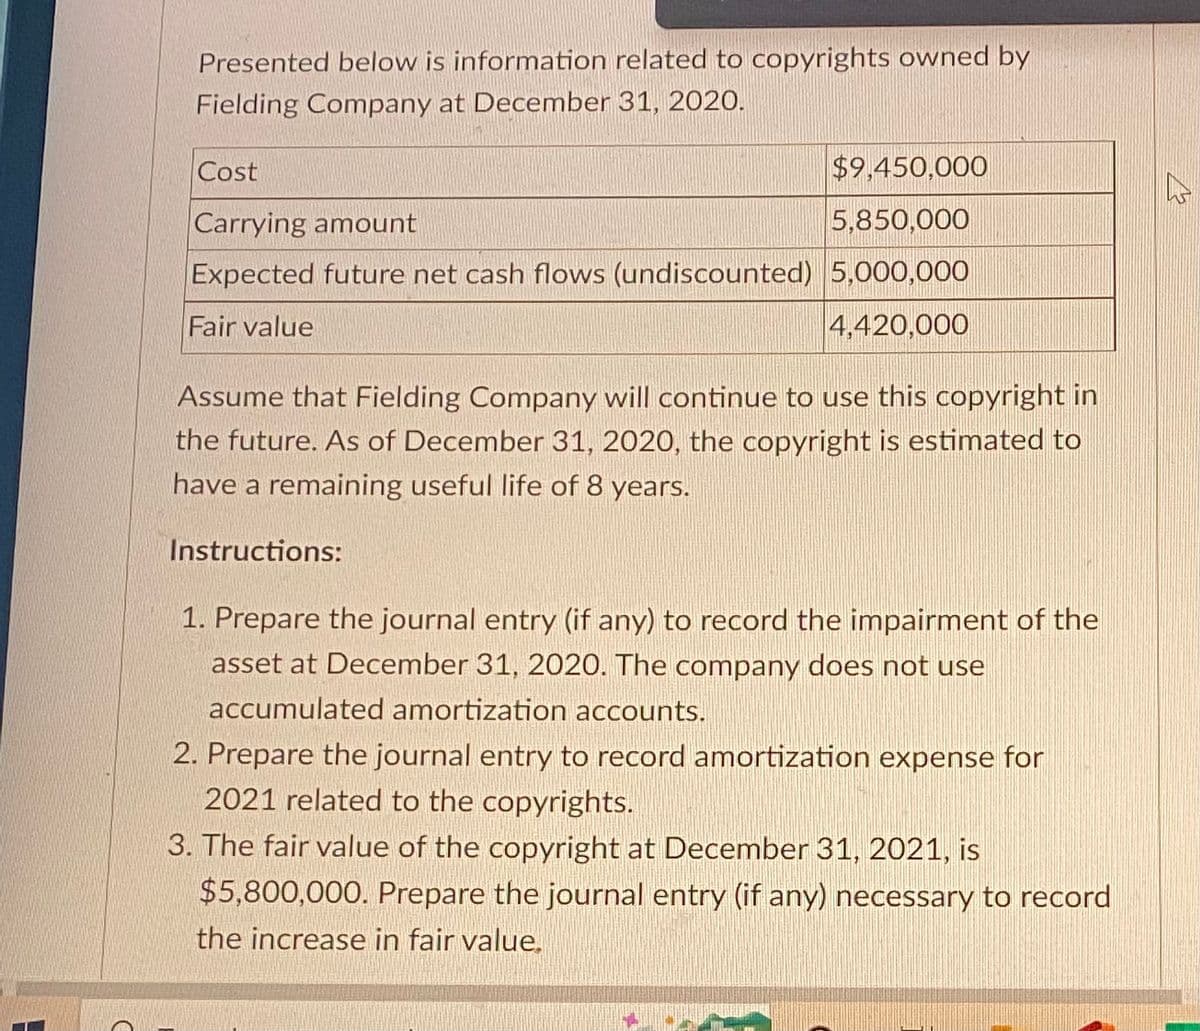 Presented below is information related to copyrights owned by
Fielding Company at December 31, 2020.
Cost
$9,450,000
Carrying amount
5,850,000
Expected future net cash flows (undiscounted) 5,000,000
Fair value
4,420,000
Assume that Fielding Company will continue to use this copyright in
the future. As of December 31, 2020, the copyright is estimated to
have a remaining useful life of 8 years.
Instructions:
1. Prepare the journal entry (if any) to record the impairment of the
asset at December 31, 2020. The company does not use
accumulated amortization accounts.
2. Prepare the journal entry to record amortization expense for
2021 related to the copyrights.
3. The fair value of the copyright at December 31, 2021, is
$5,800,000. Prepare the journal entry (if any) necessary to record
the increase in fair value.
h